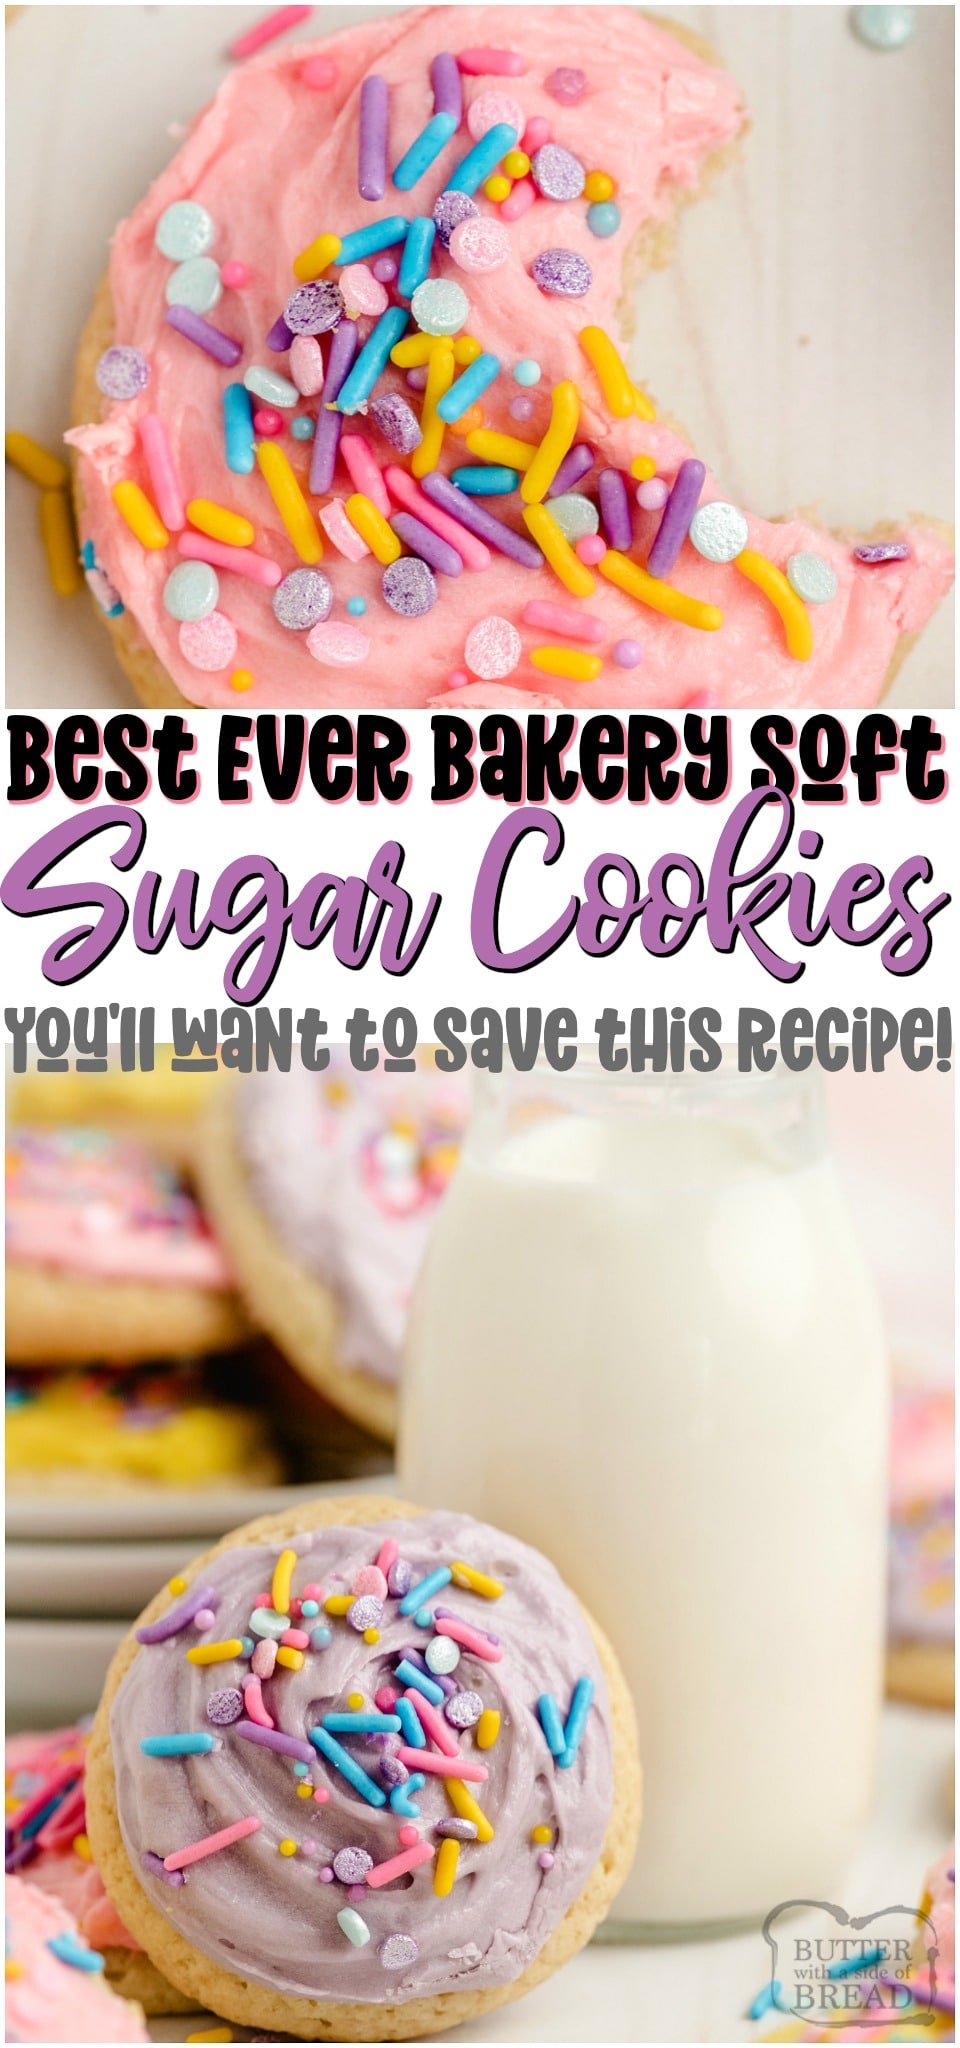 Super Soft Sugar Cookies made with butter, sugar, flour & sour cream for great flavor and soft texture! Softest sugar cookies you've ever had- & they decorate beautifully! Save this recipe! 